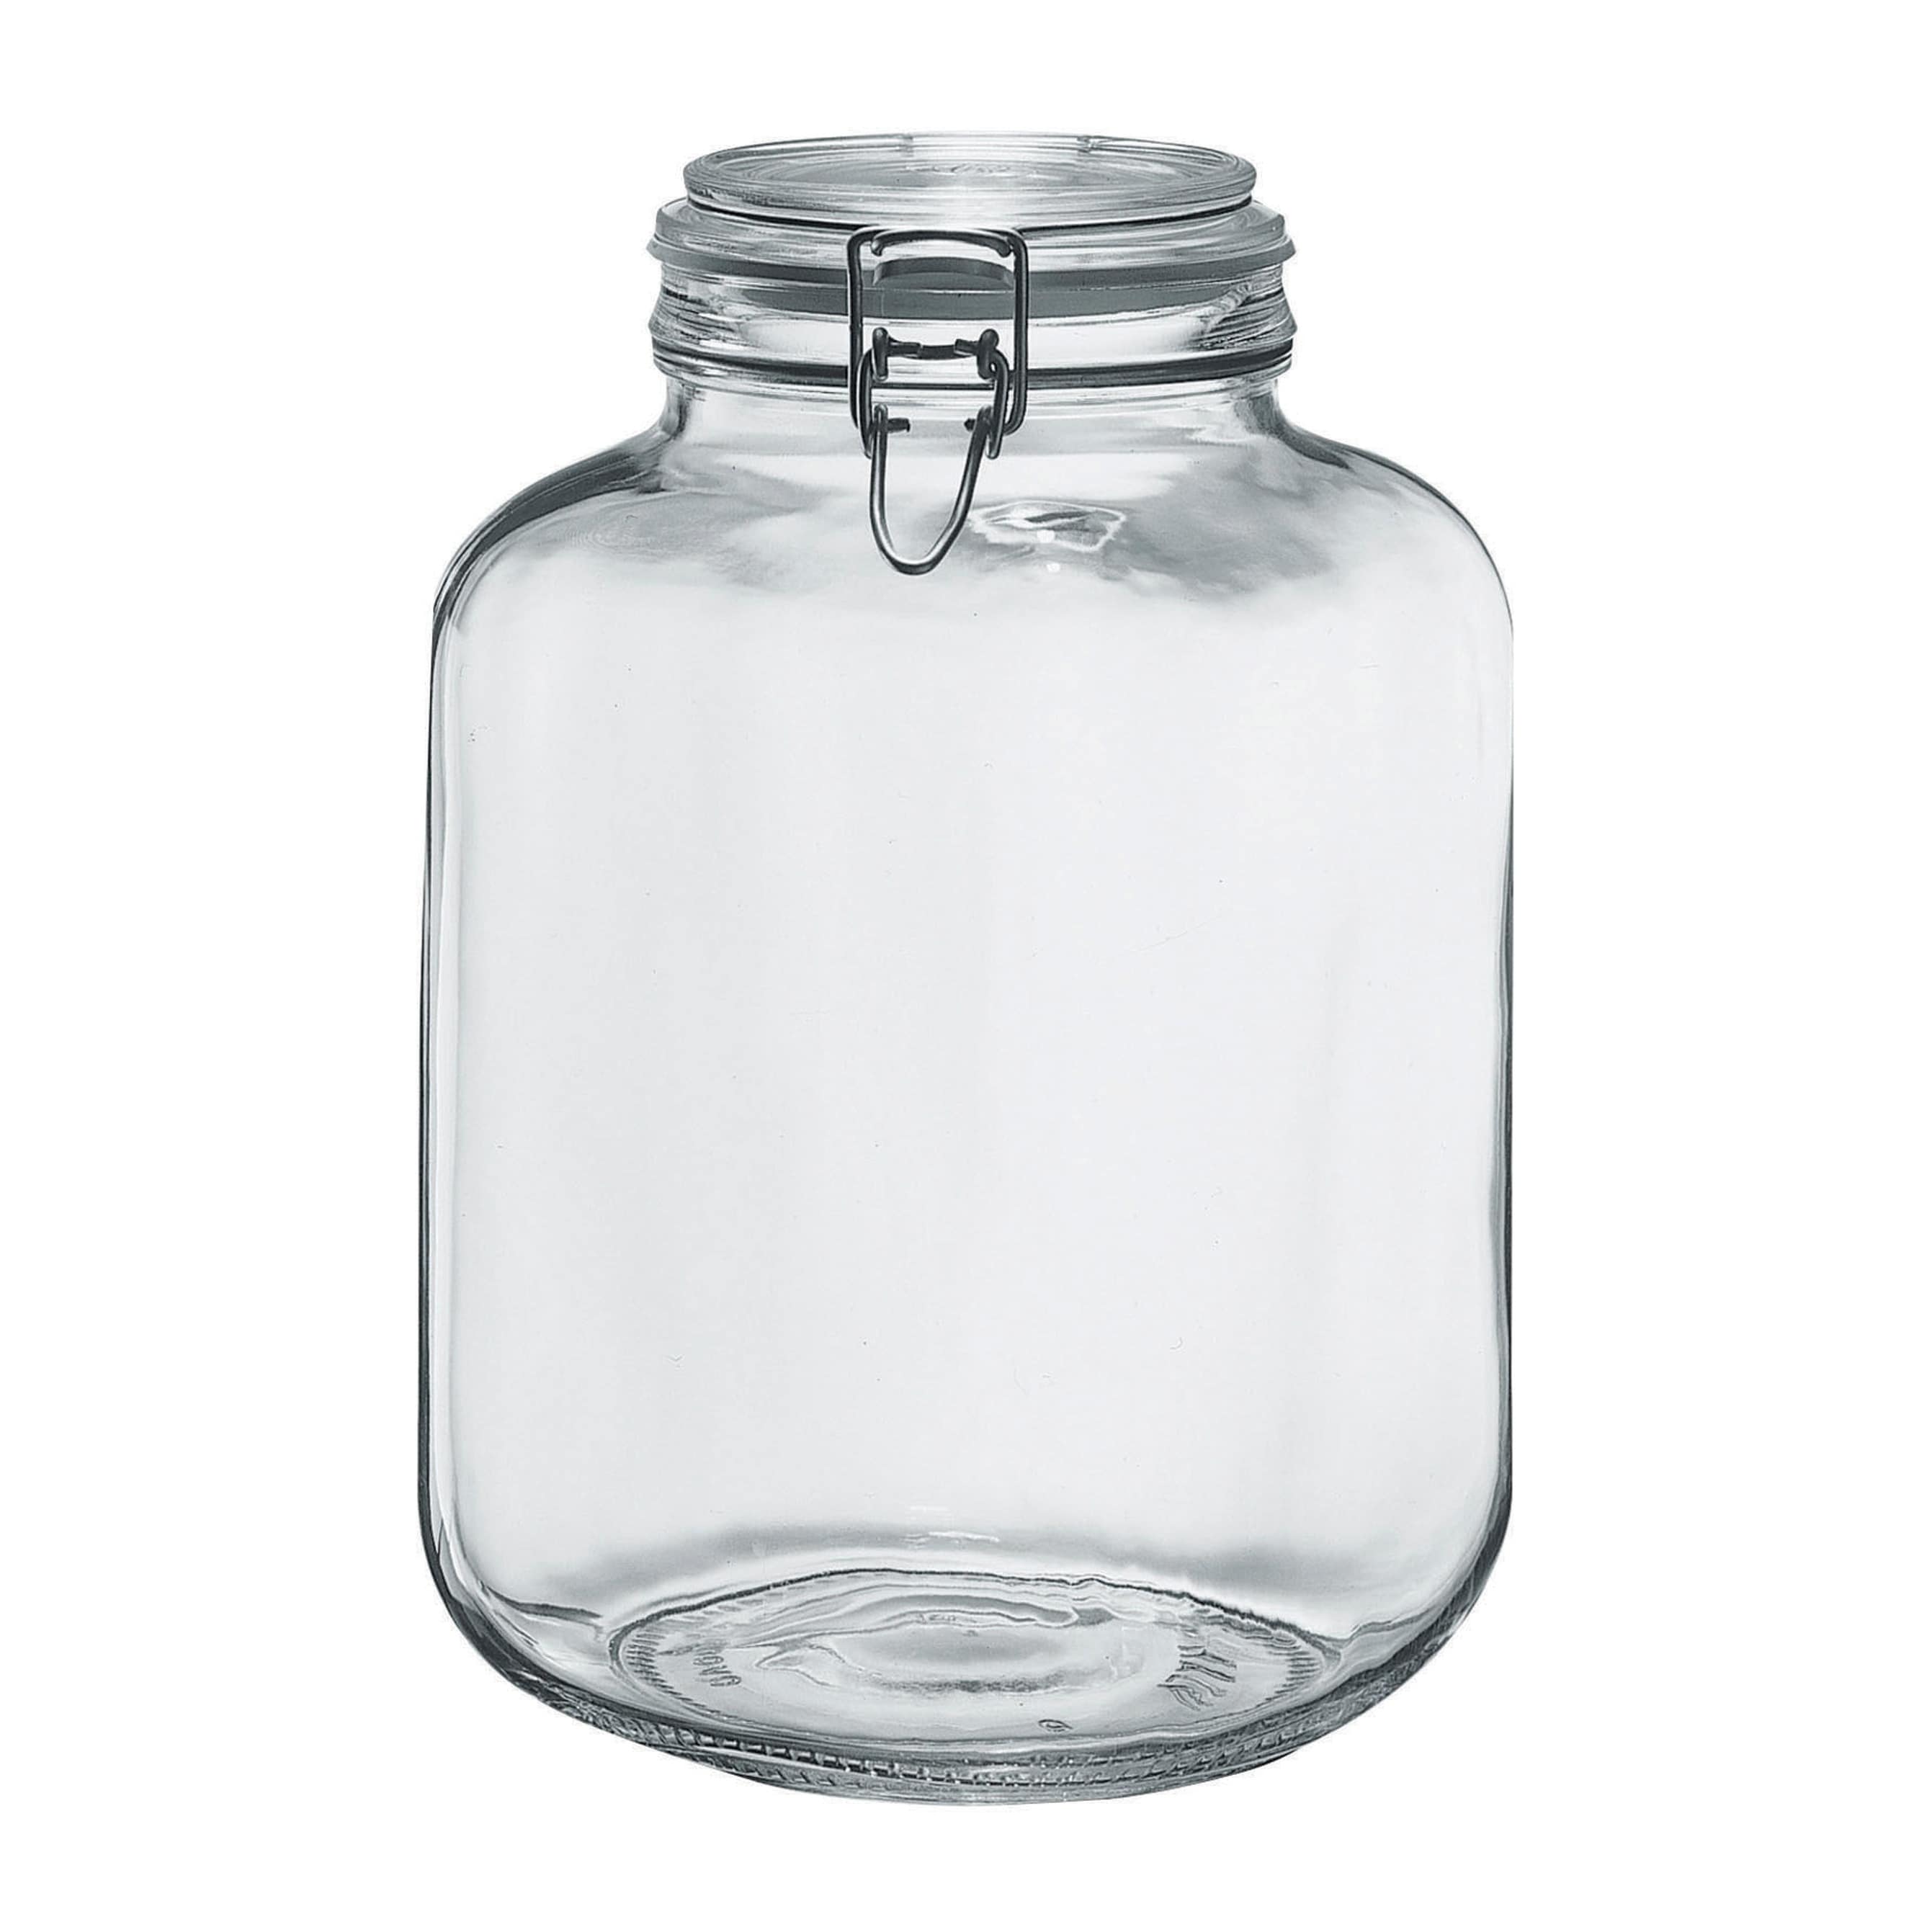 https://ak1.ostkcdn.com/images/products/is/images/direct/c7349d18ca0c2374e022f5e270d8c63deb9a99b5/Amici-Home-Glass-Hermetic-Preserving-Canning-Jar-Set-of-2.jpg